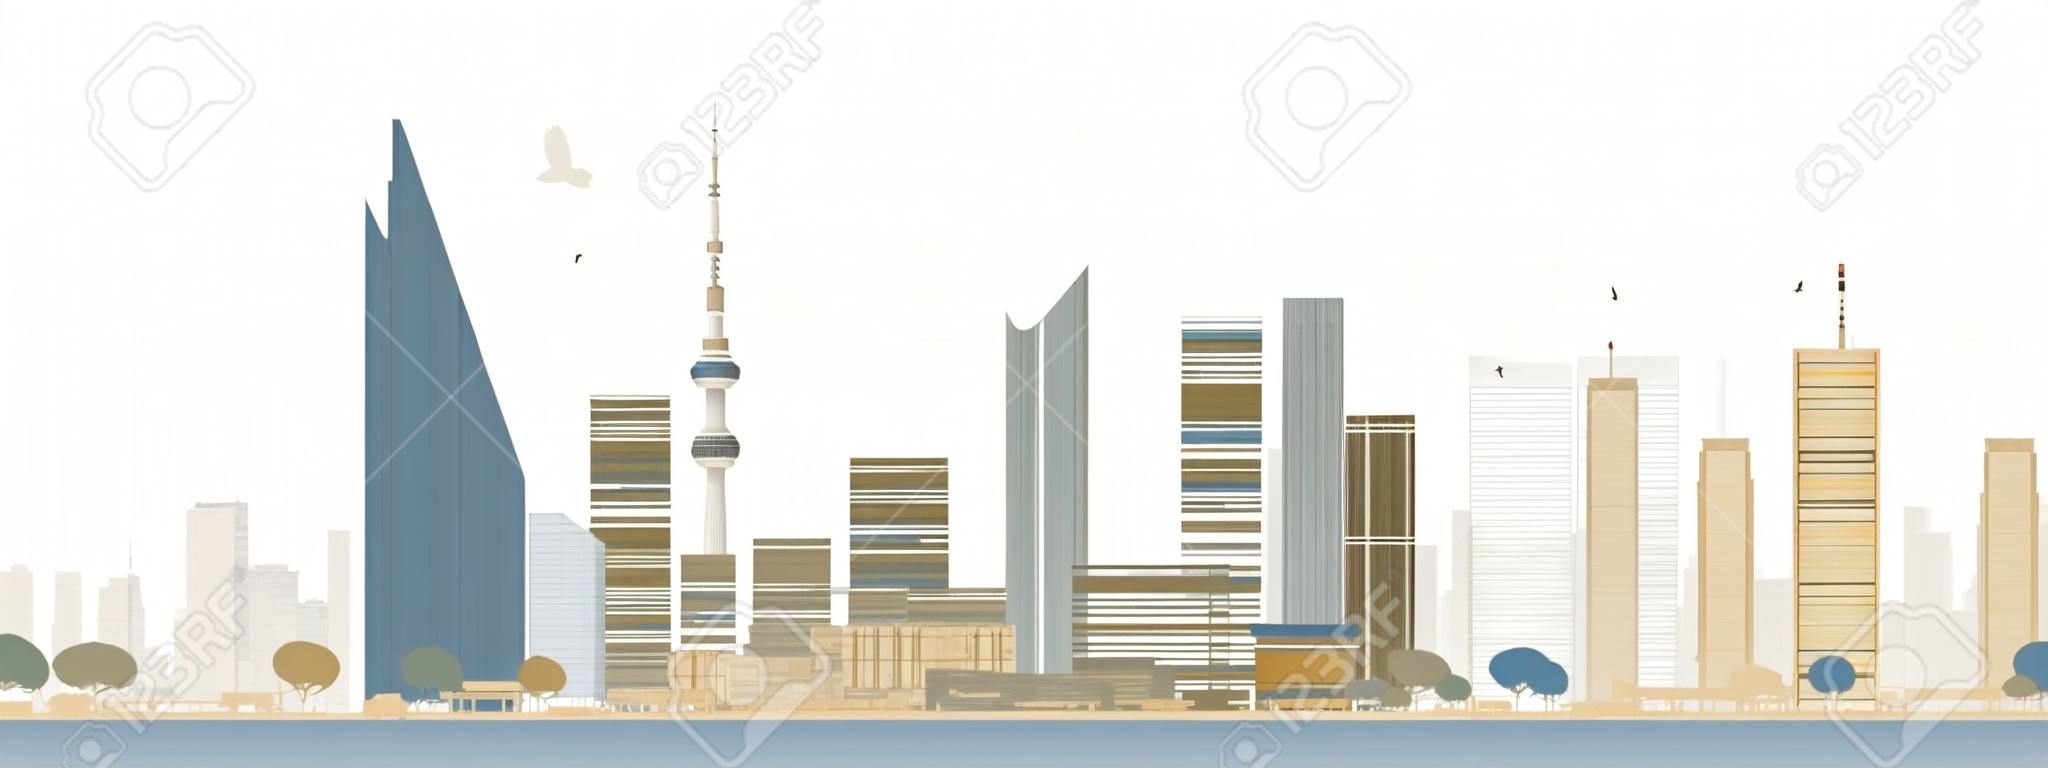 Seoul skyline with blue and brown buildings. Vector illustration